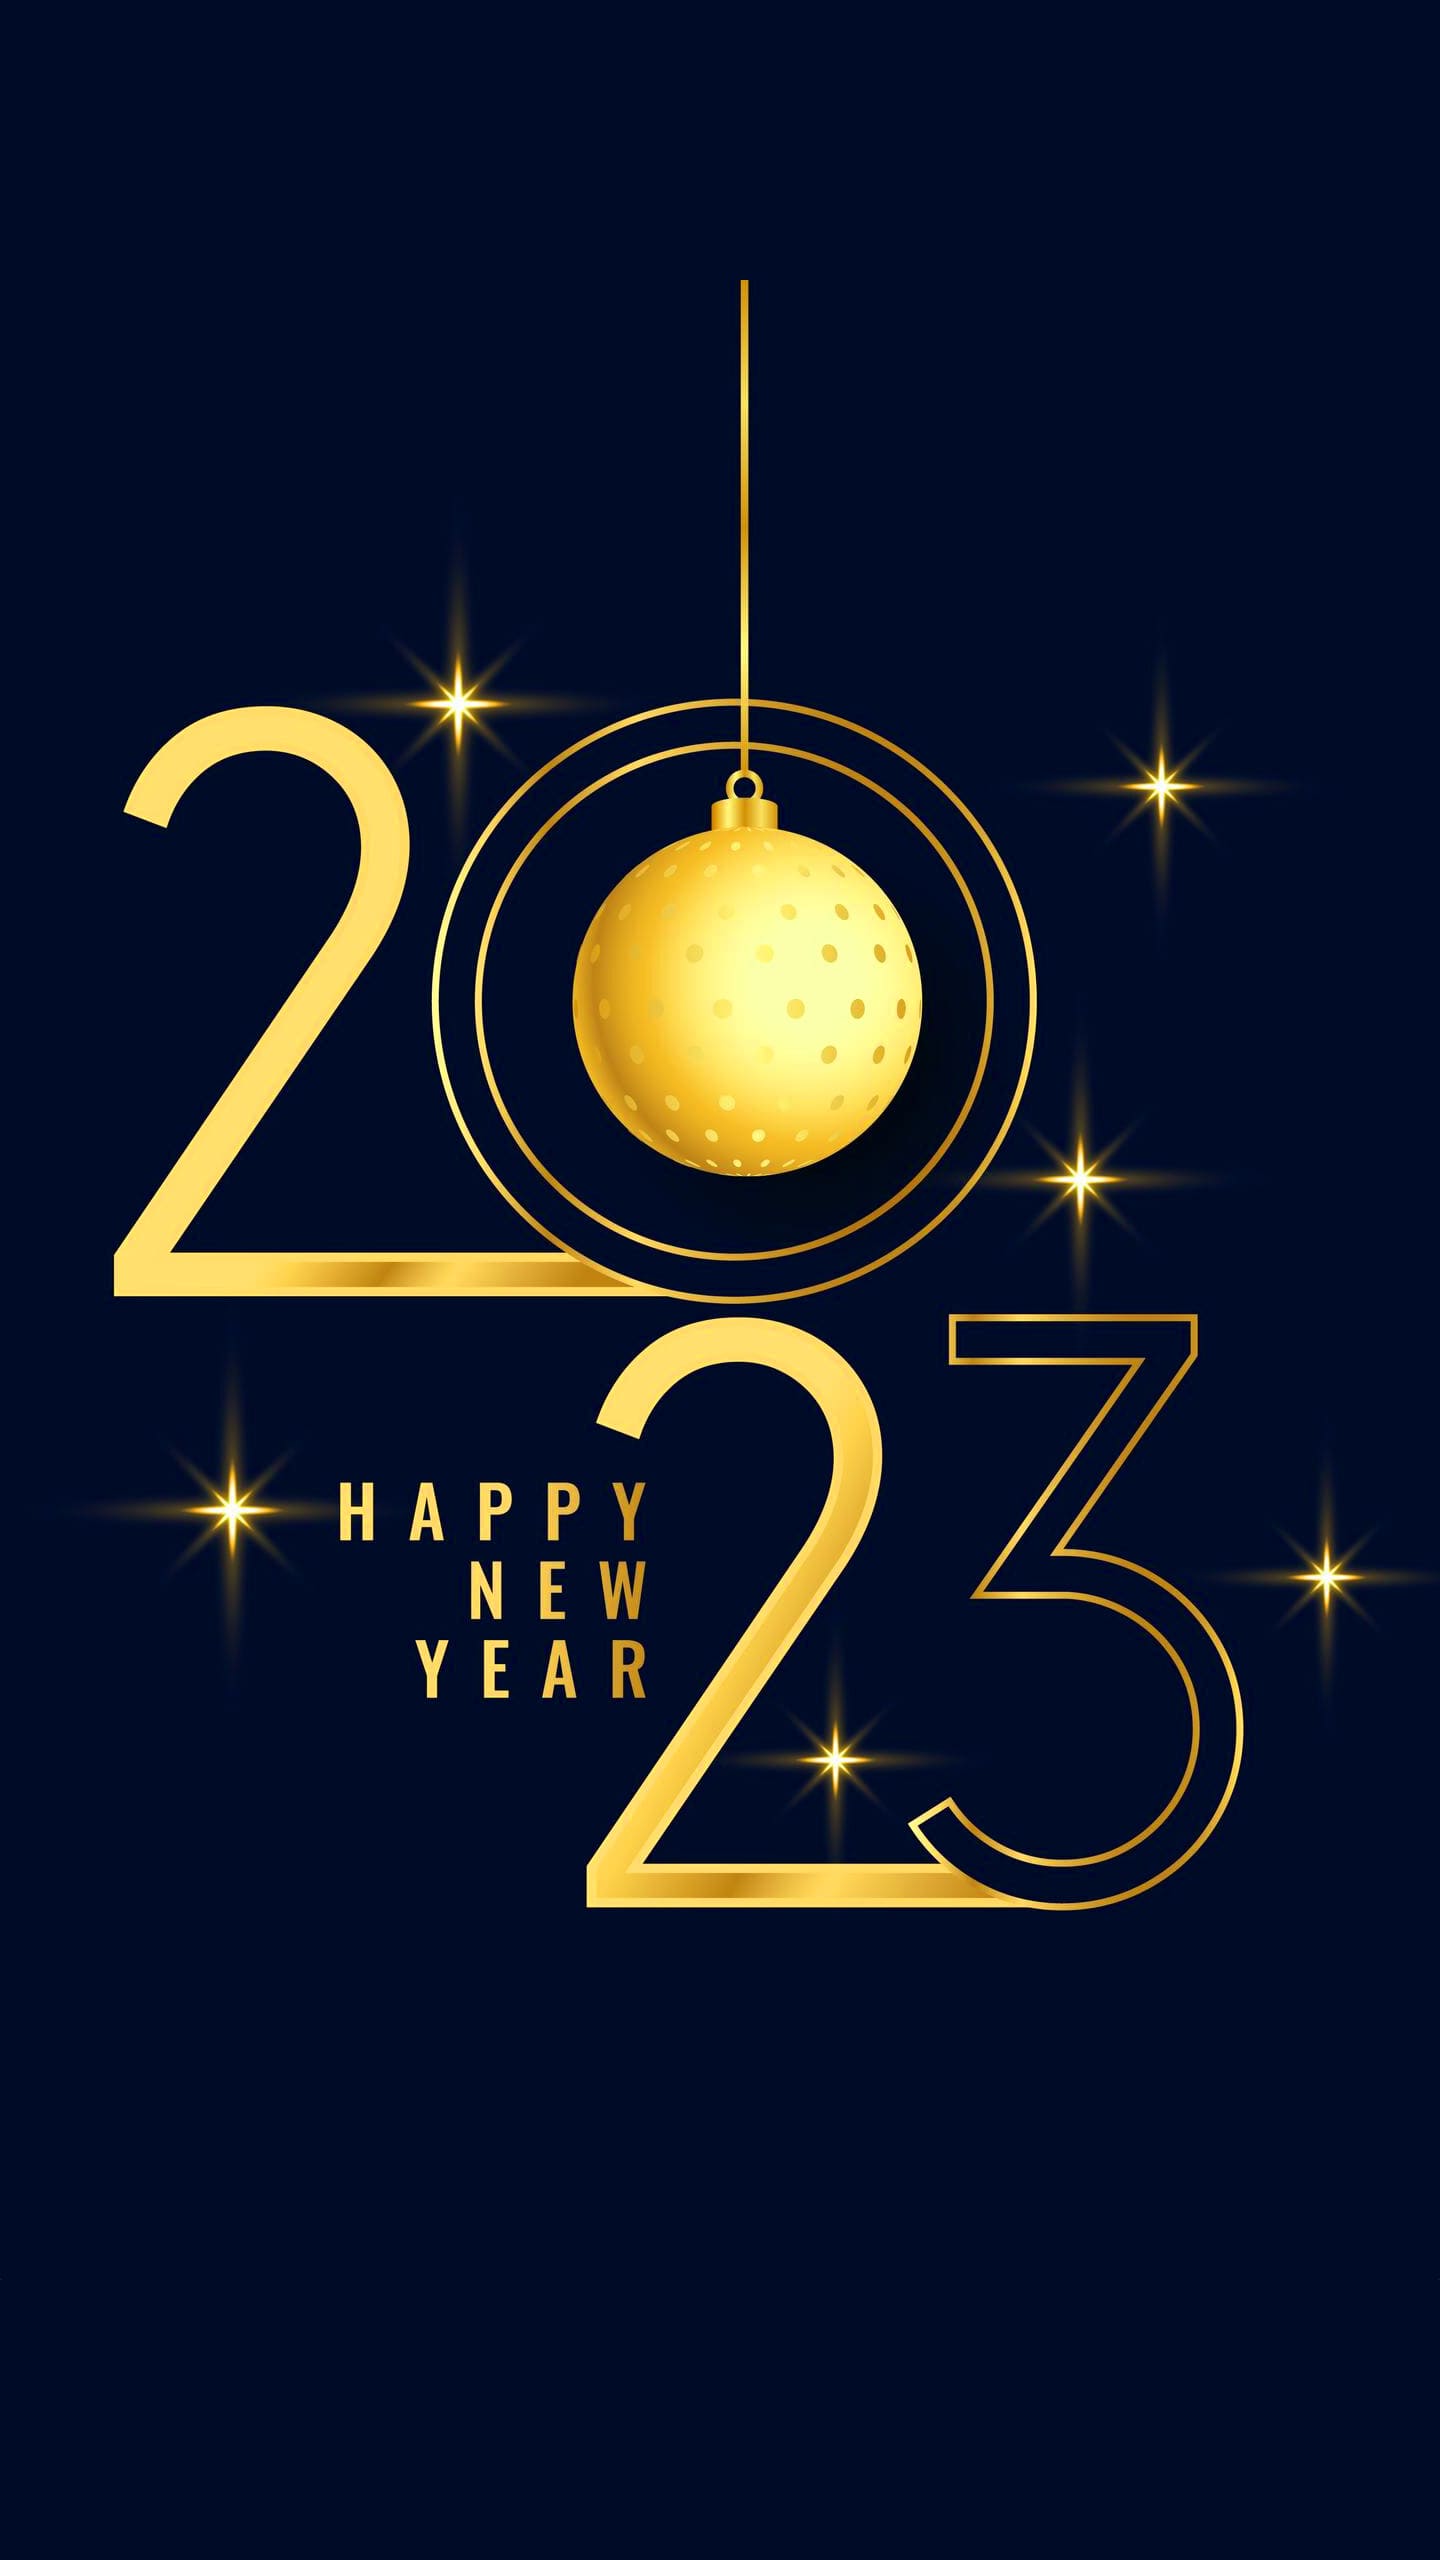 Happy New Year 2023 IPhone Wallpaper HD  IPhone Wallpapers  iPhone  Wallpapers